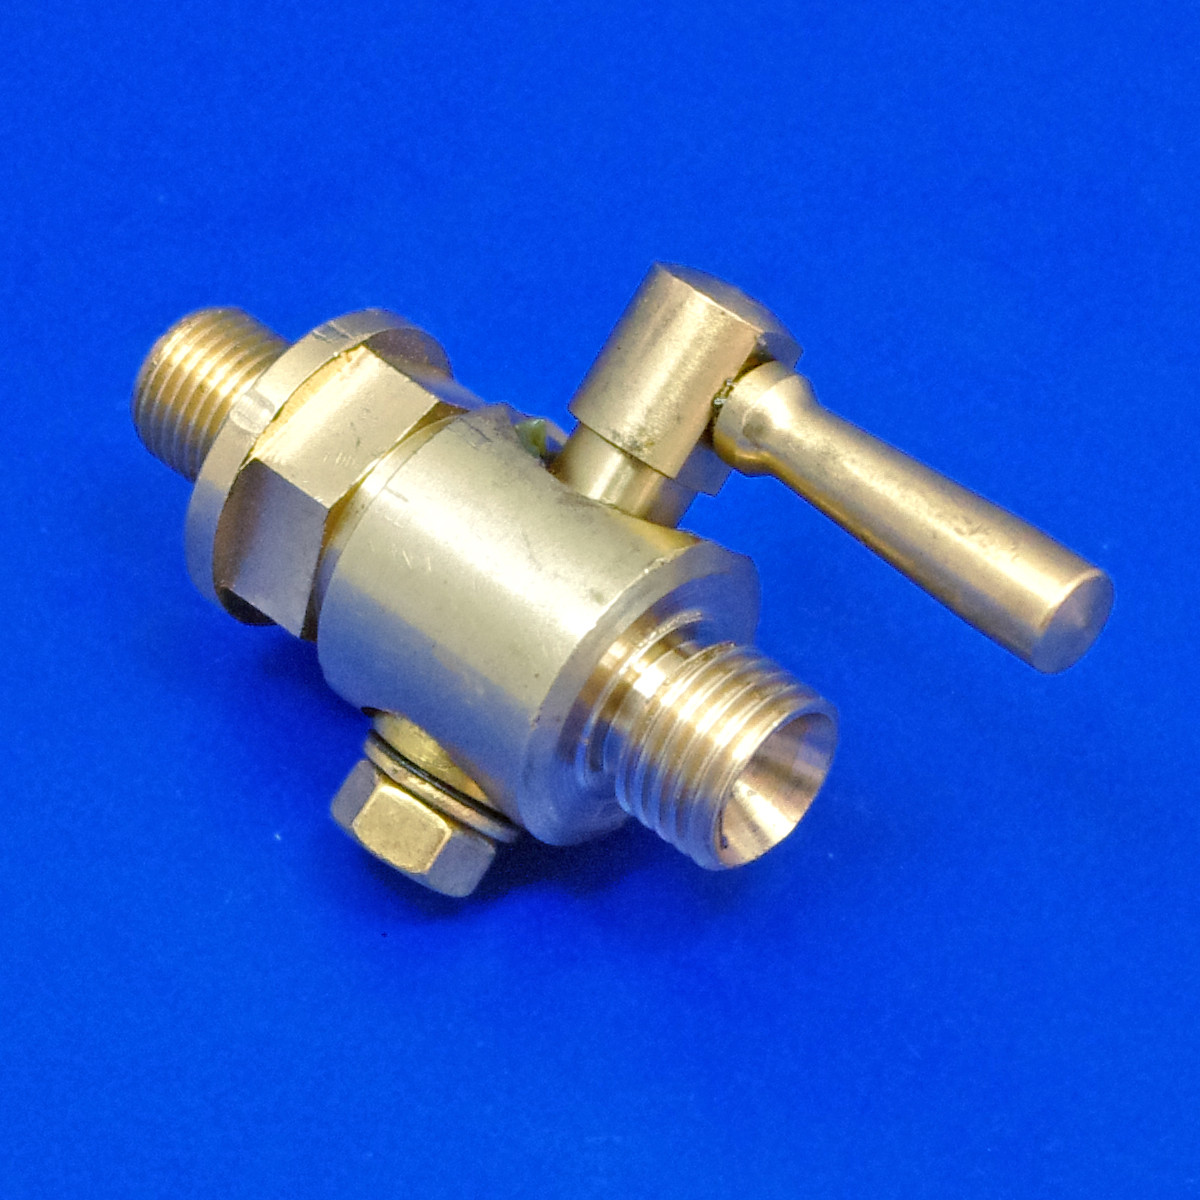 Straight in line tap 1/8" BSP thread into tank, 7/16" x 19TPI outlet